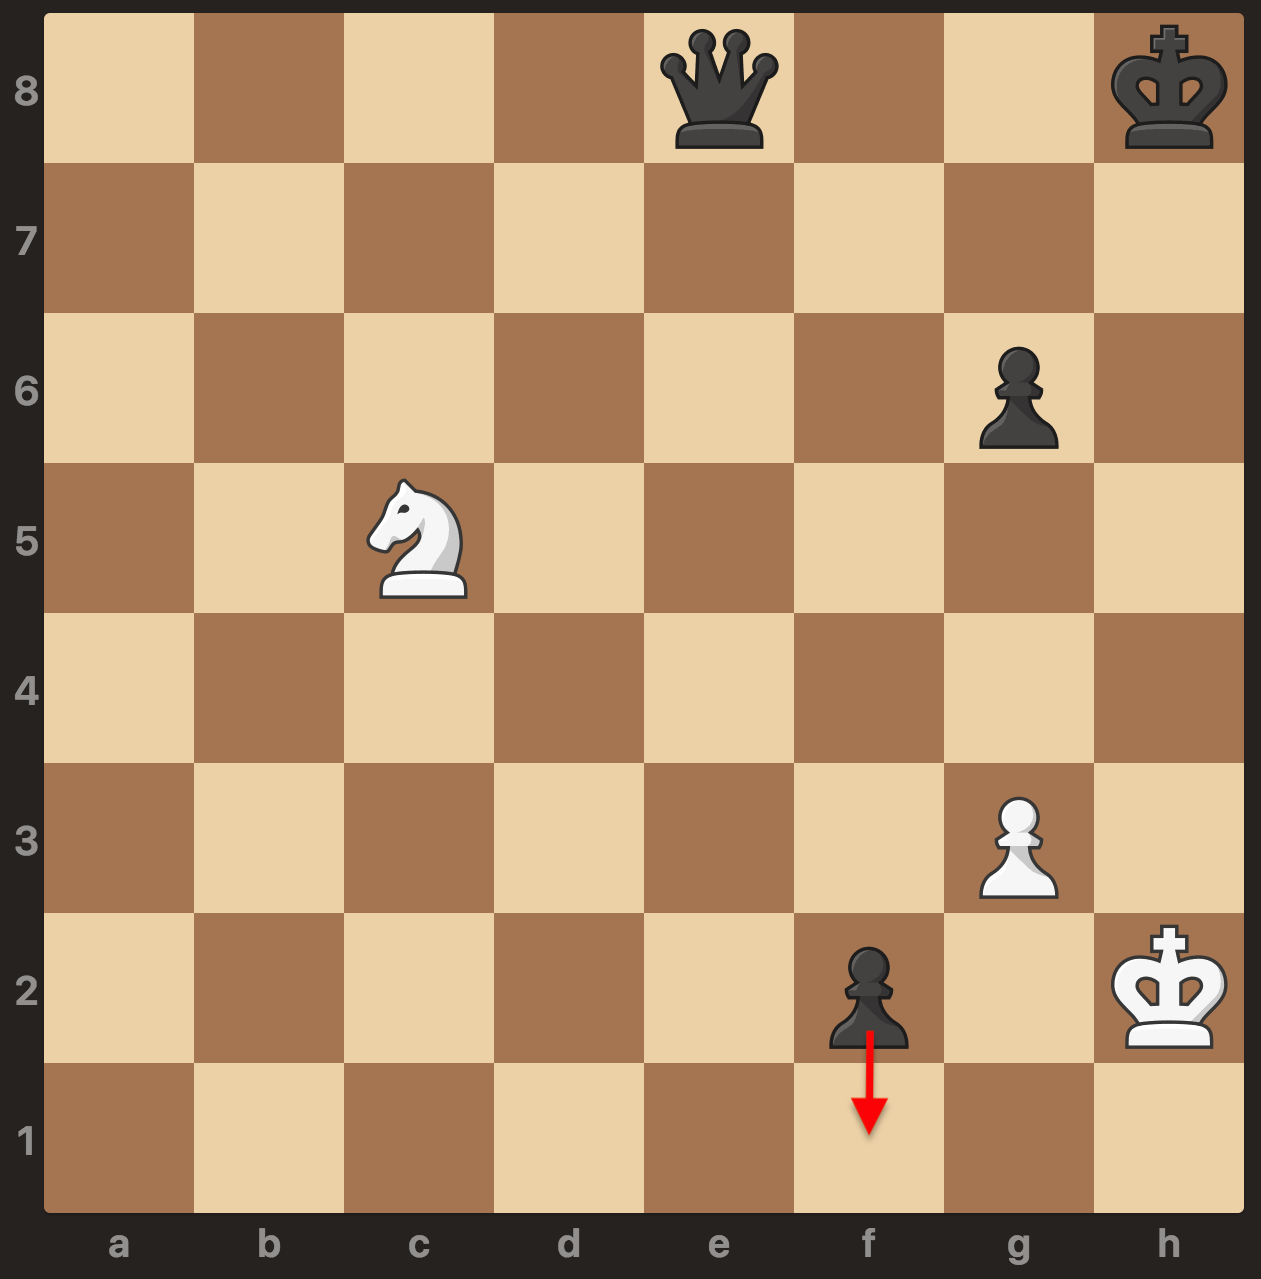 O que significa White is down two pawns and a knight. (about